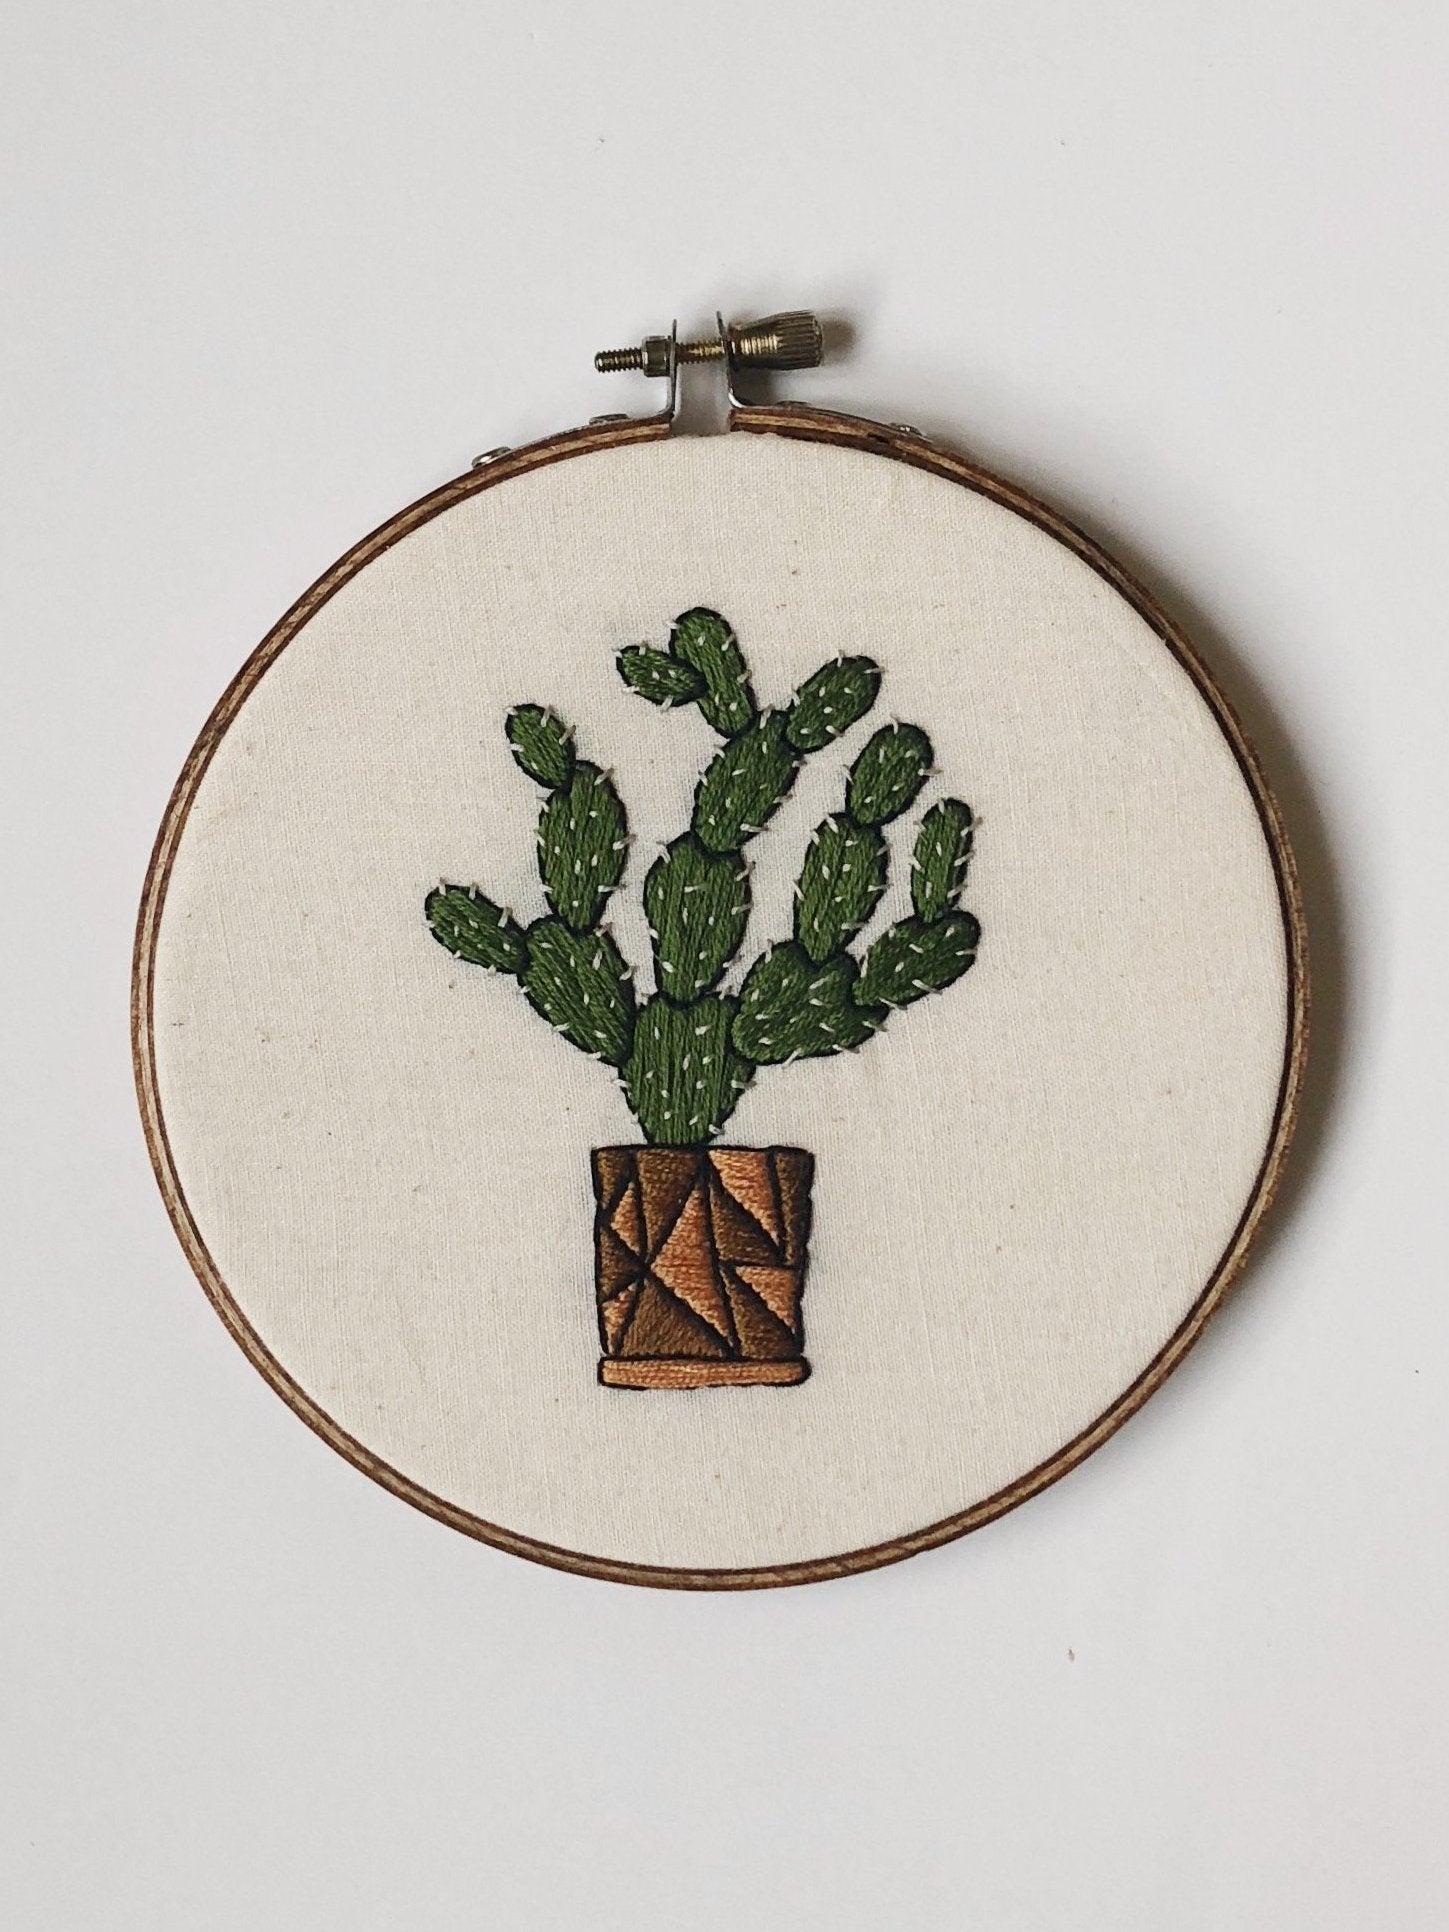 Growing Cacti - Thistle & Thread Design - Embroidery Kit